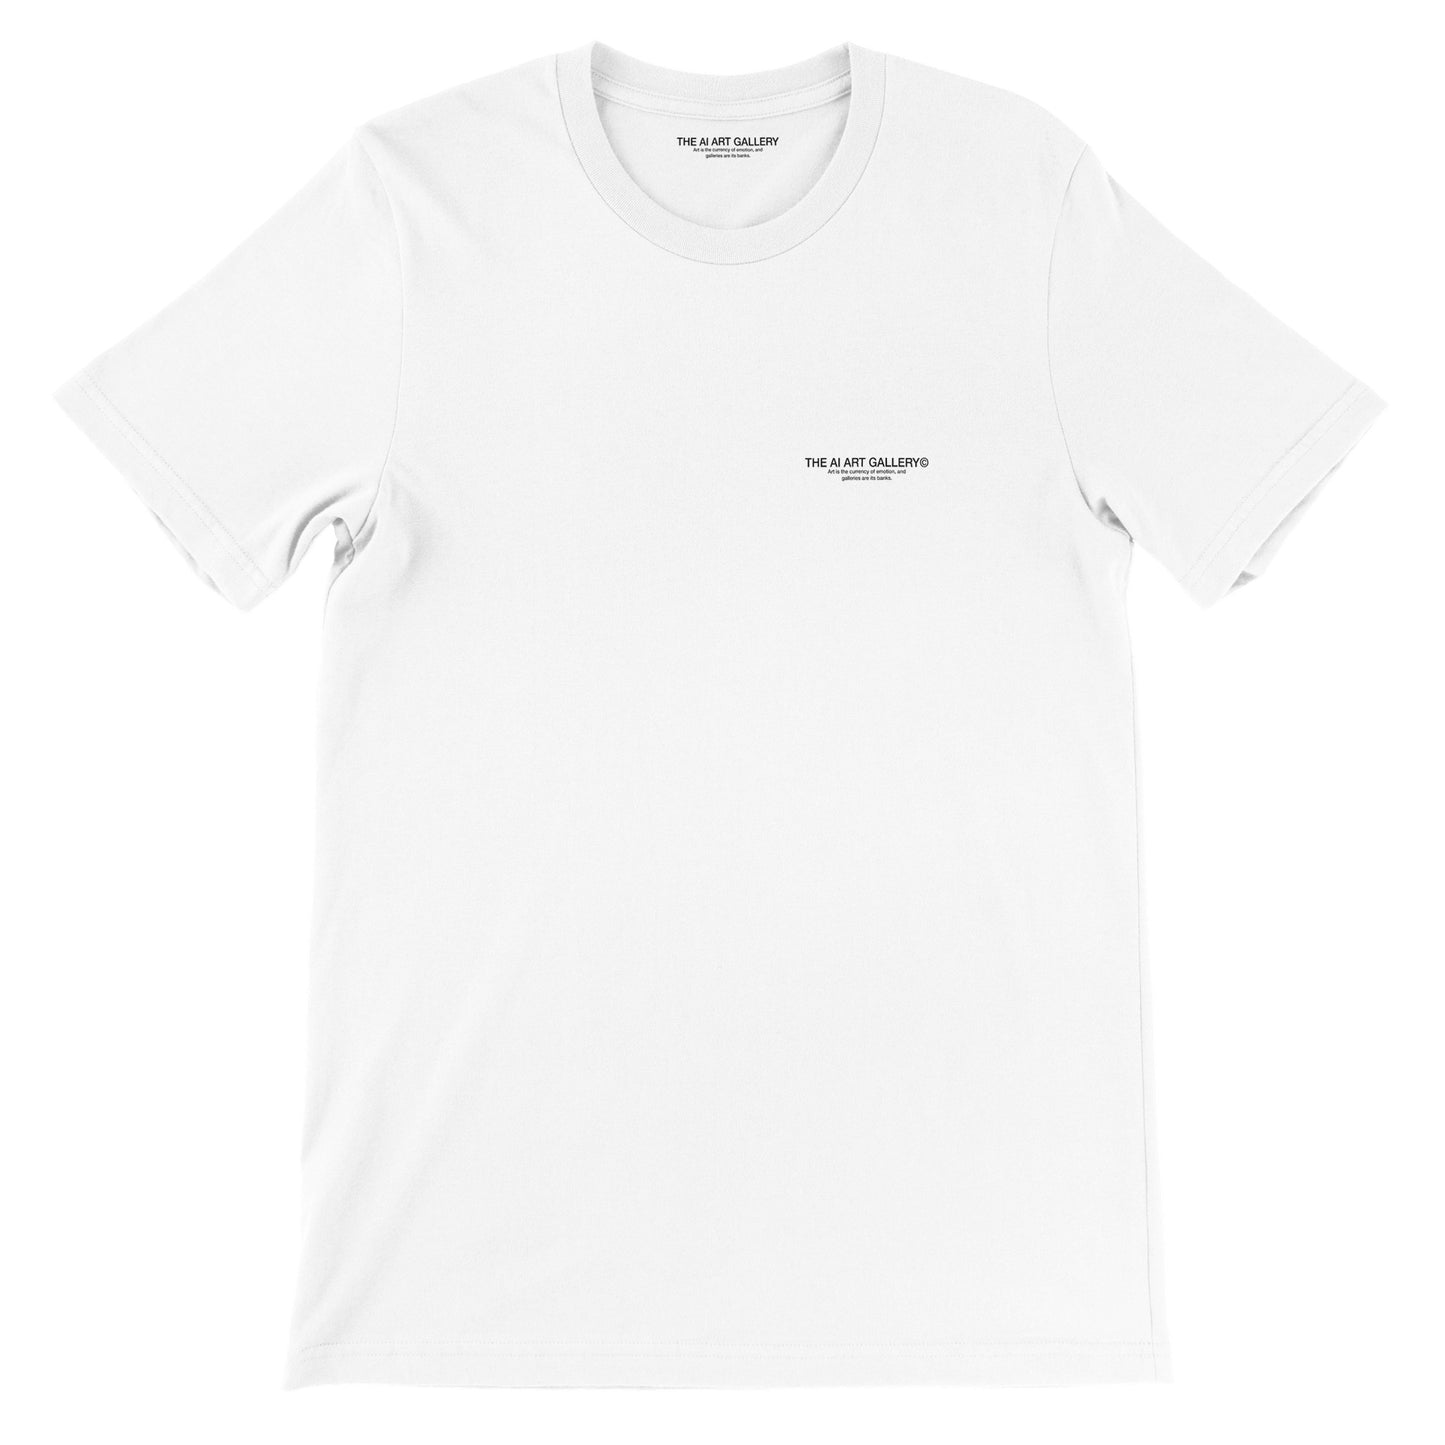 arte silver / Gallery Staff Collection / T-shirt / white